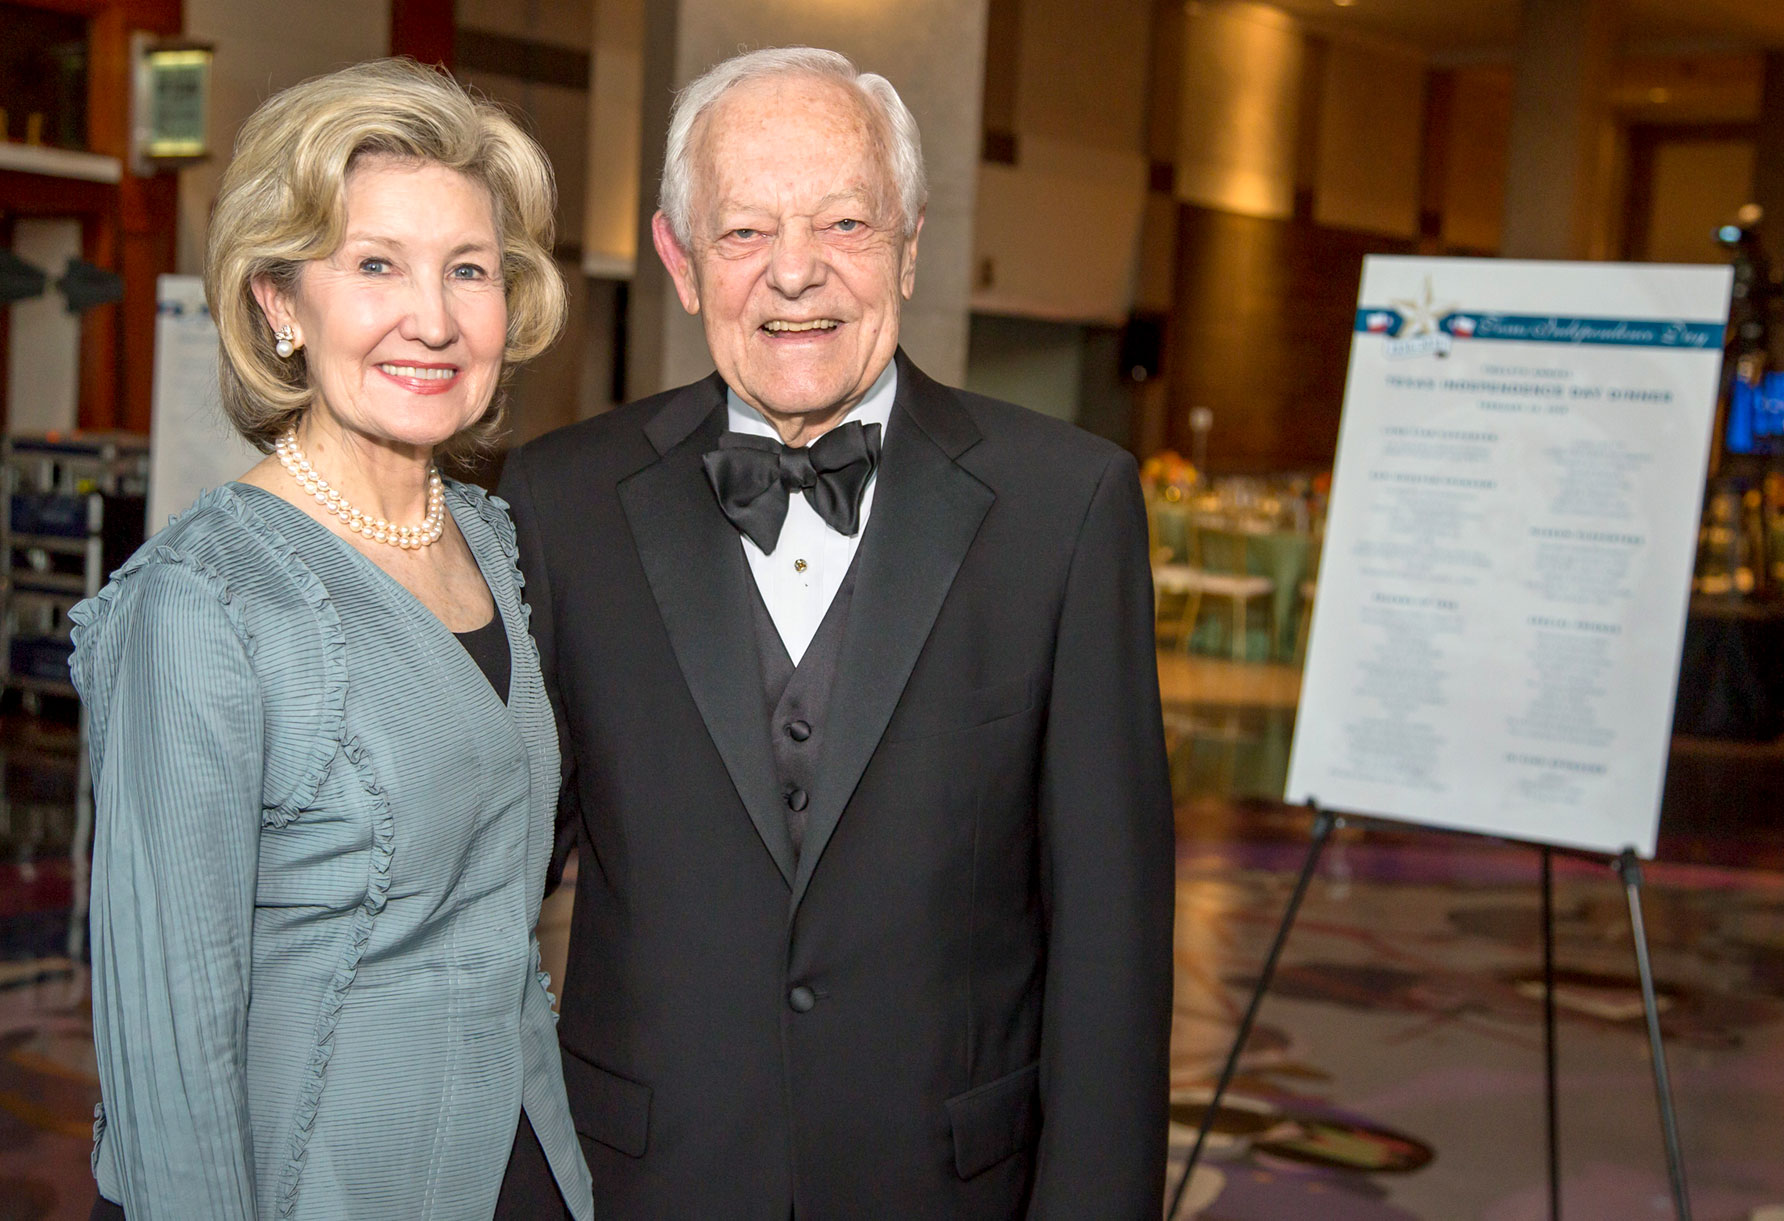 The annual History-Making Texans Awards Dinner was held last month in Austin and honored Senator Kay Bailey Hutchison and Bob Schieffer. Photo Courtesy Chris Caselli.